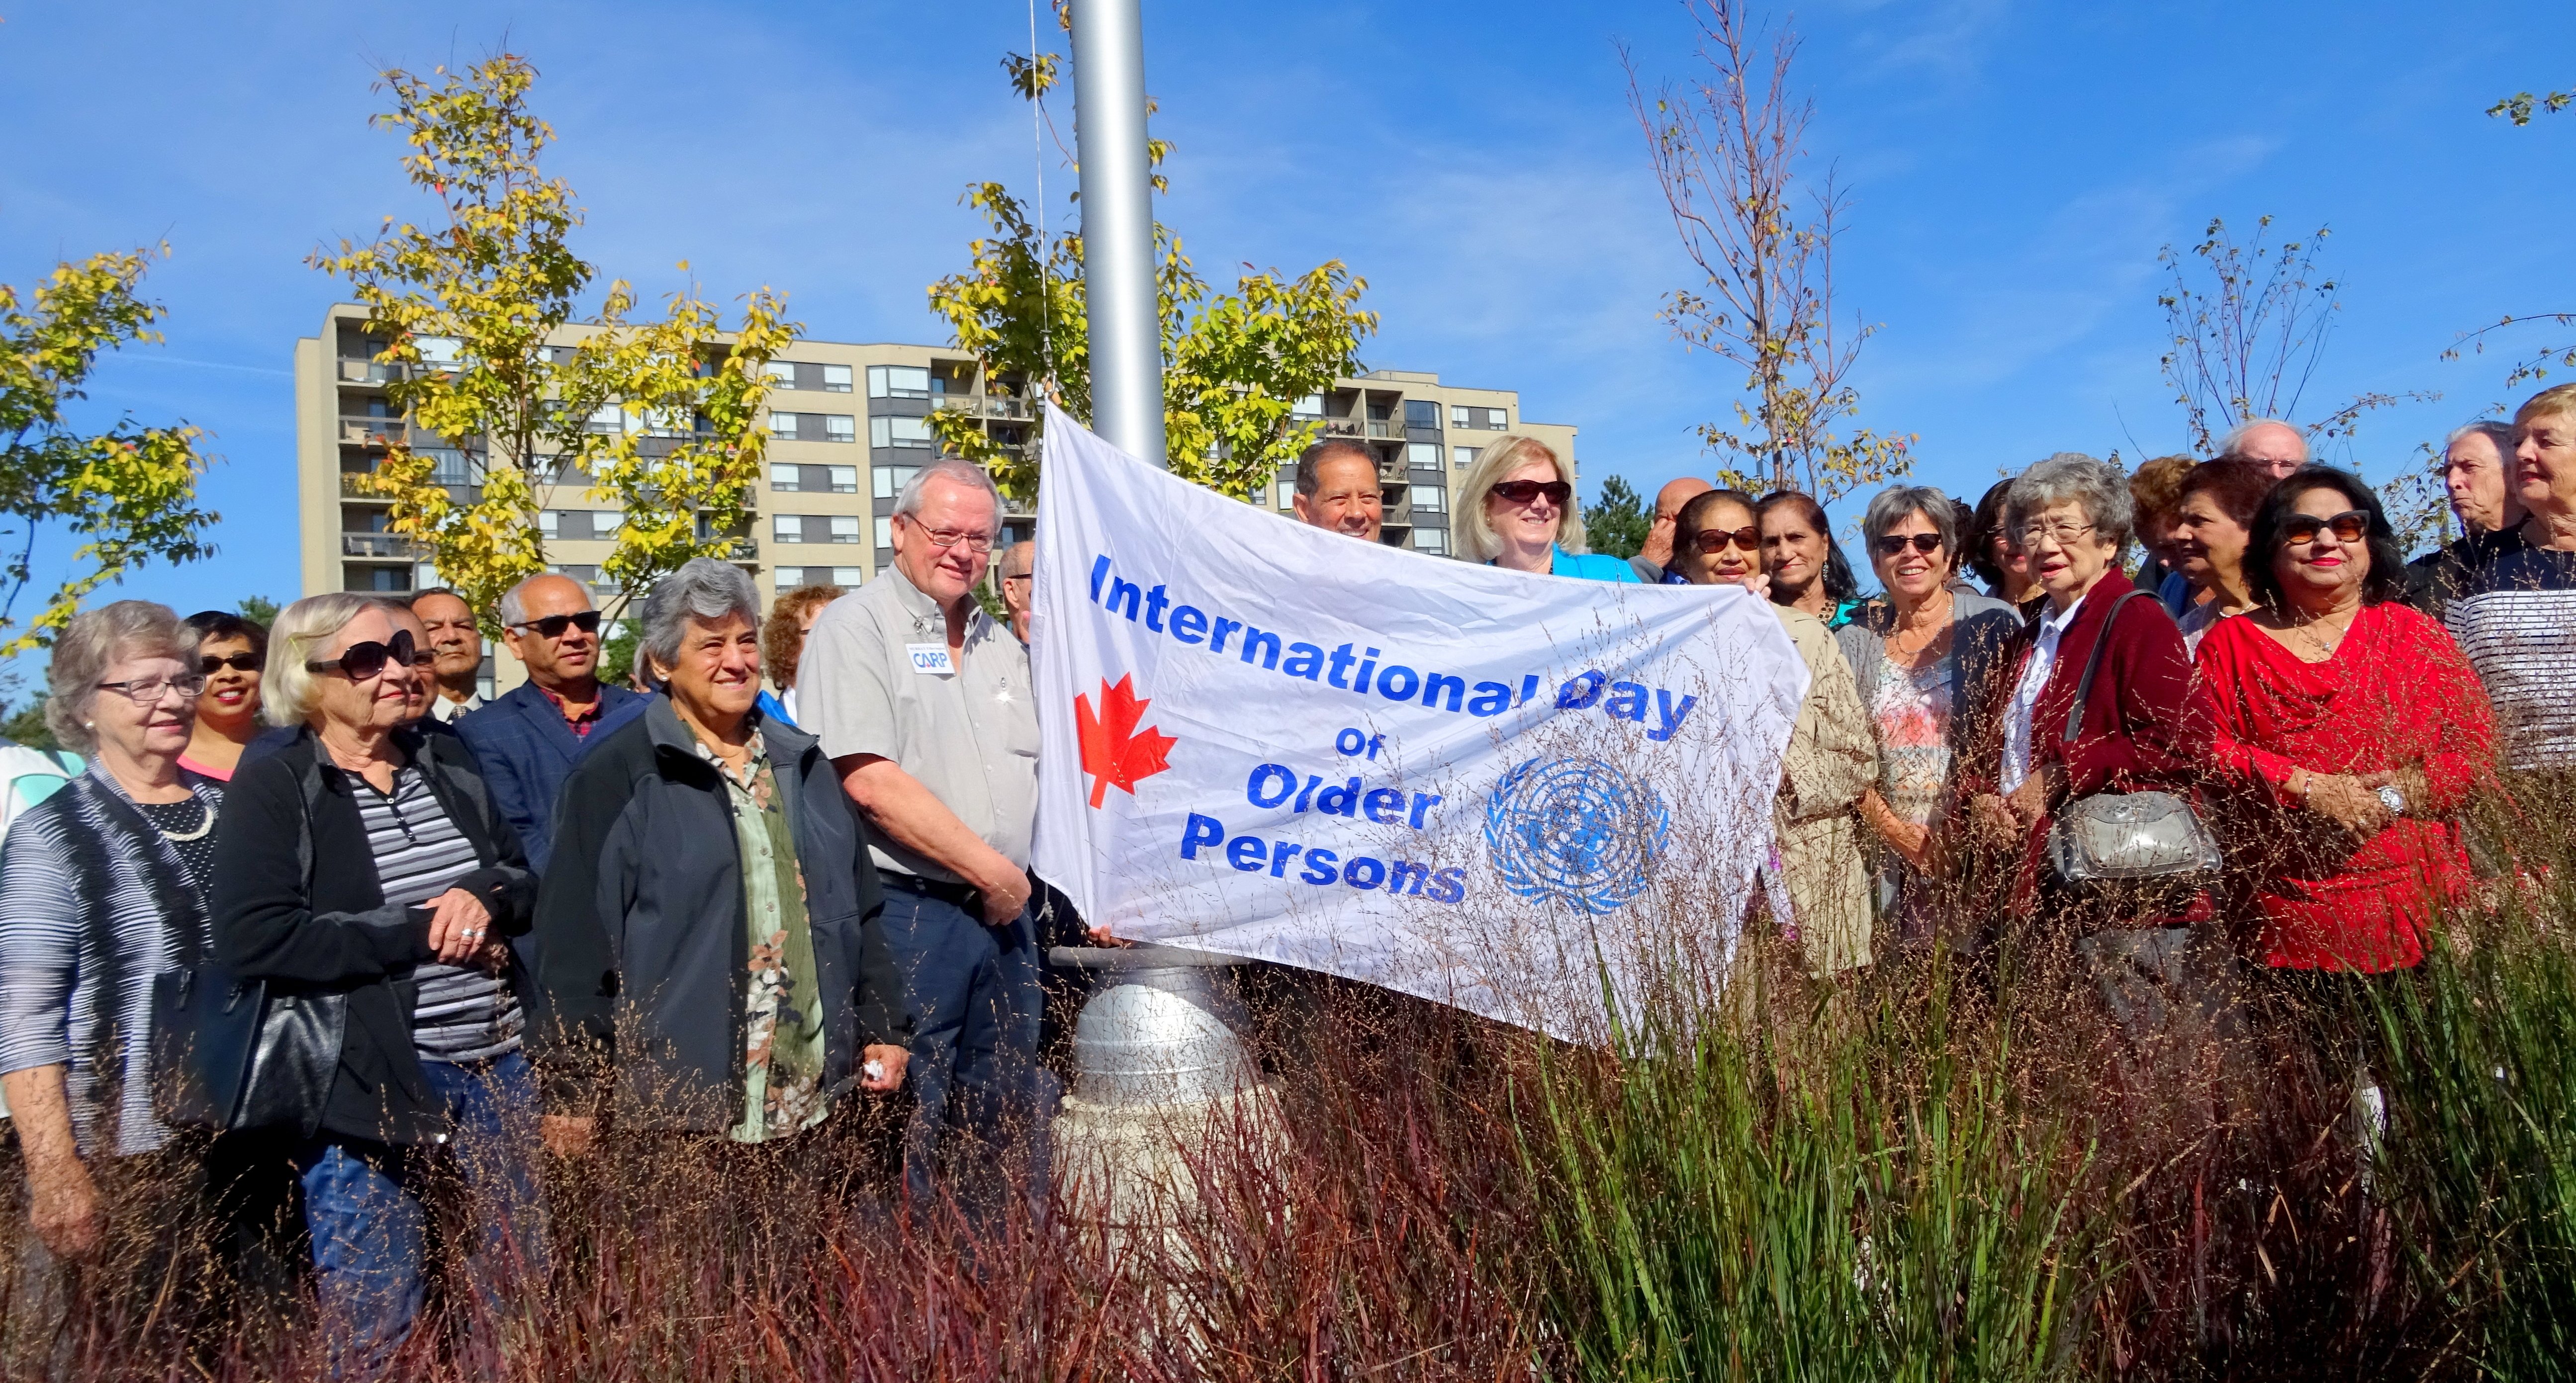 Murray Etherington, Bernard Jordaan, Pat Saito and others at International Day of Older Persons flag raising ceremony, Meadowvale CC, 2 Oct 2017 Photo by I Lee